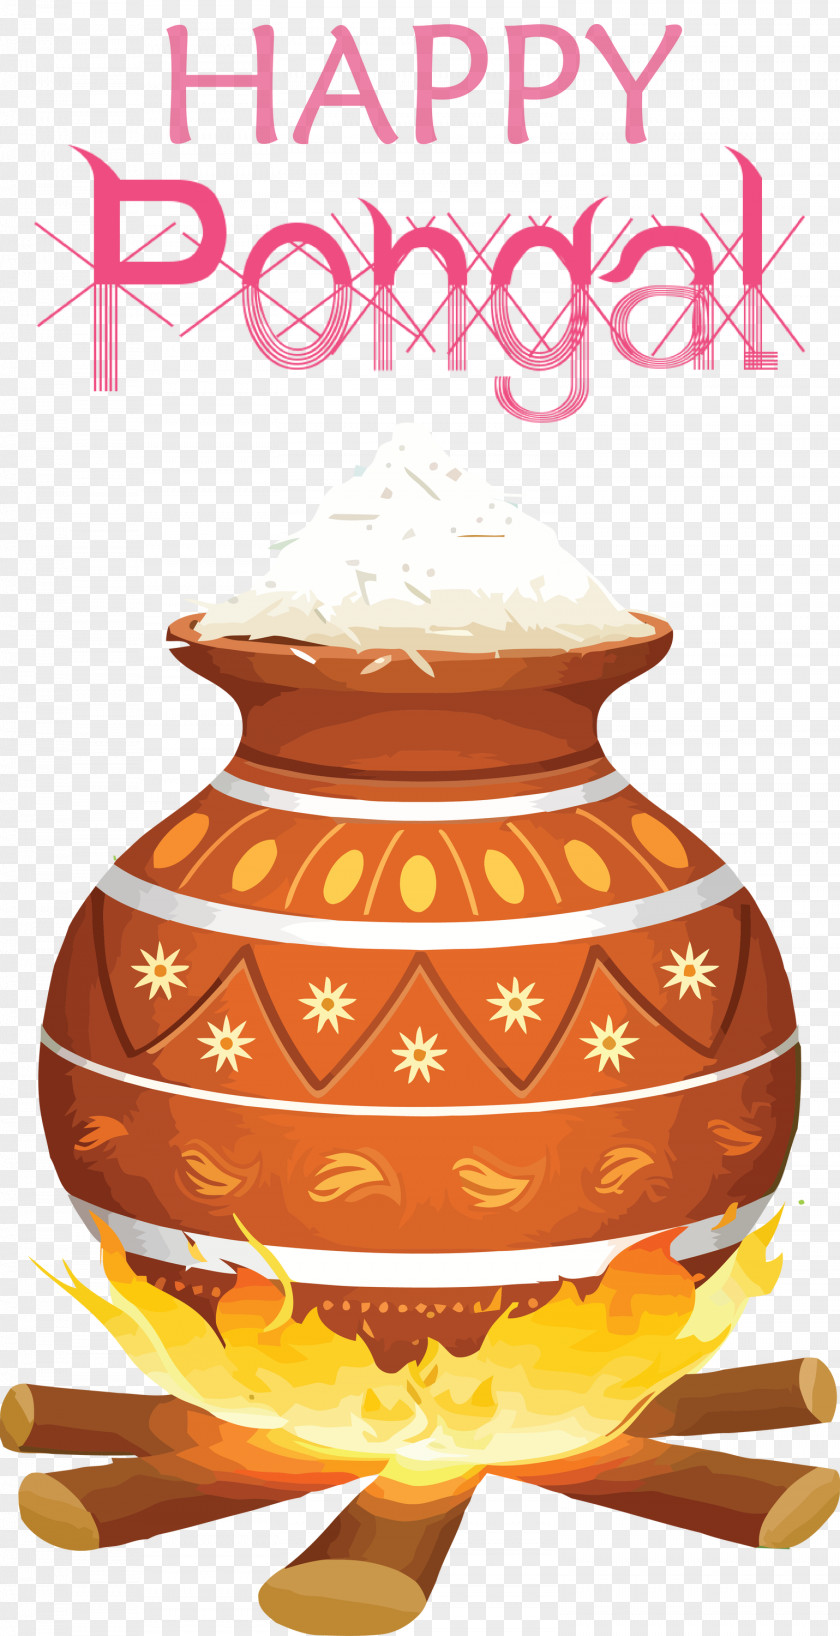 Pongal Happy PNG